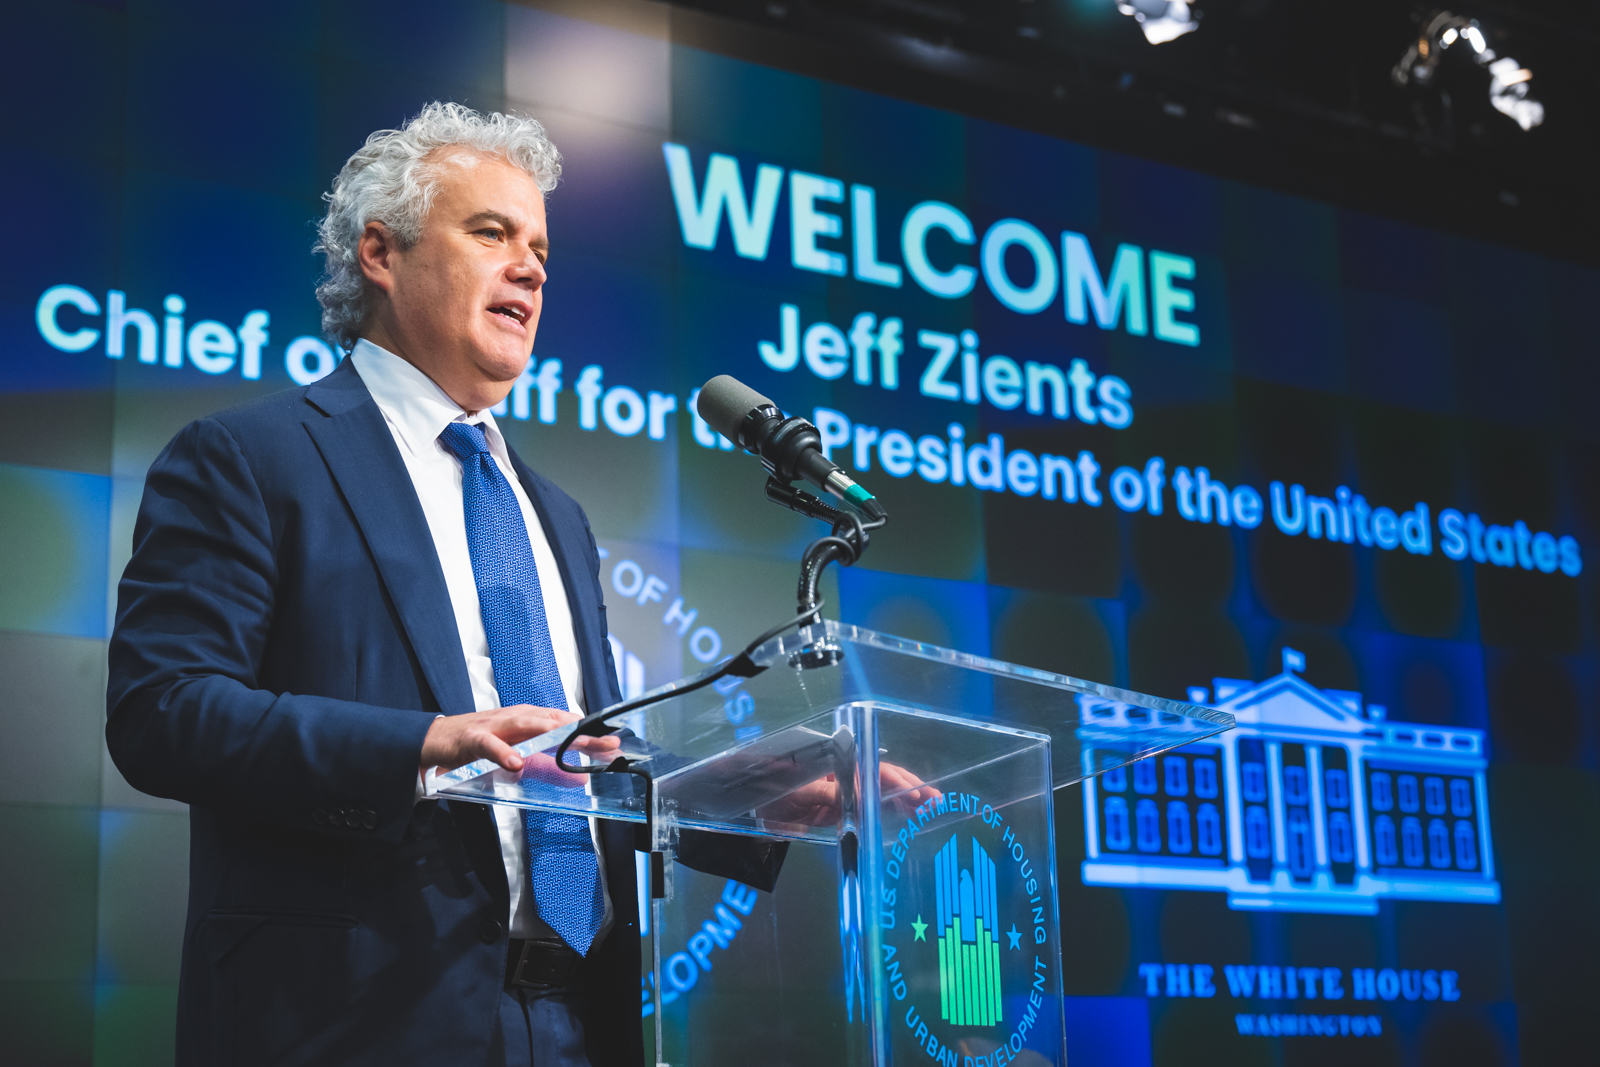 Washington’s Man of the Moment: The Jeff Zients Story